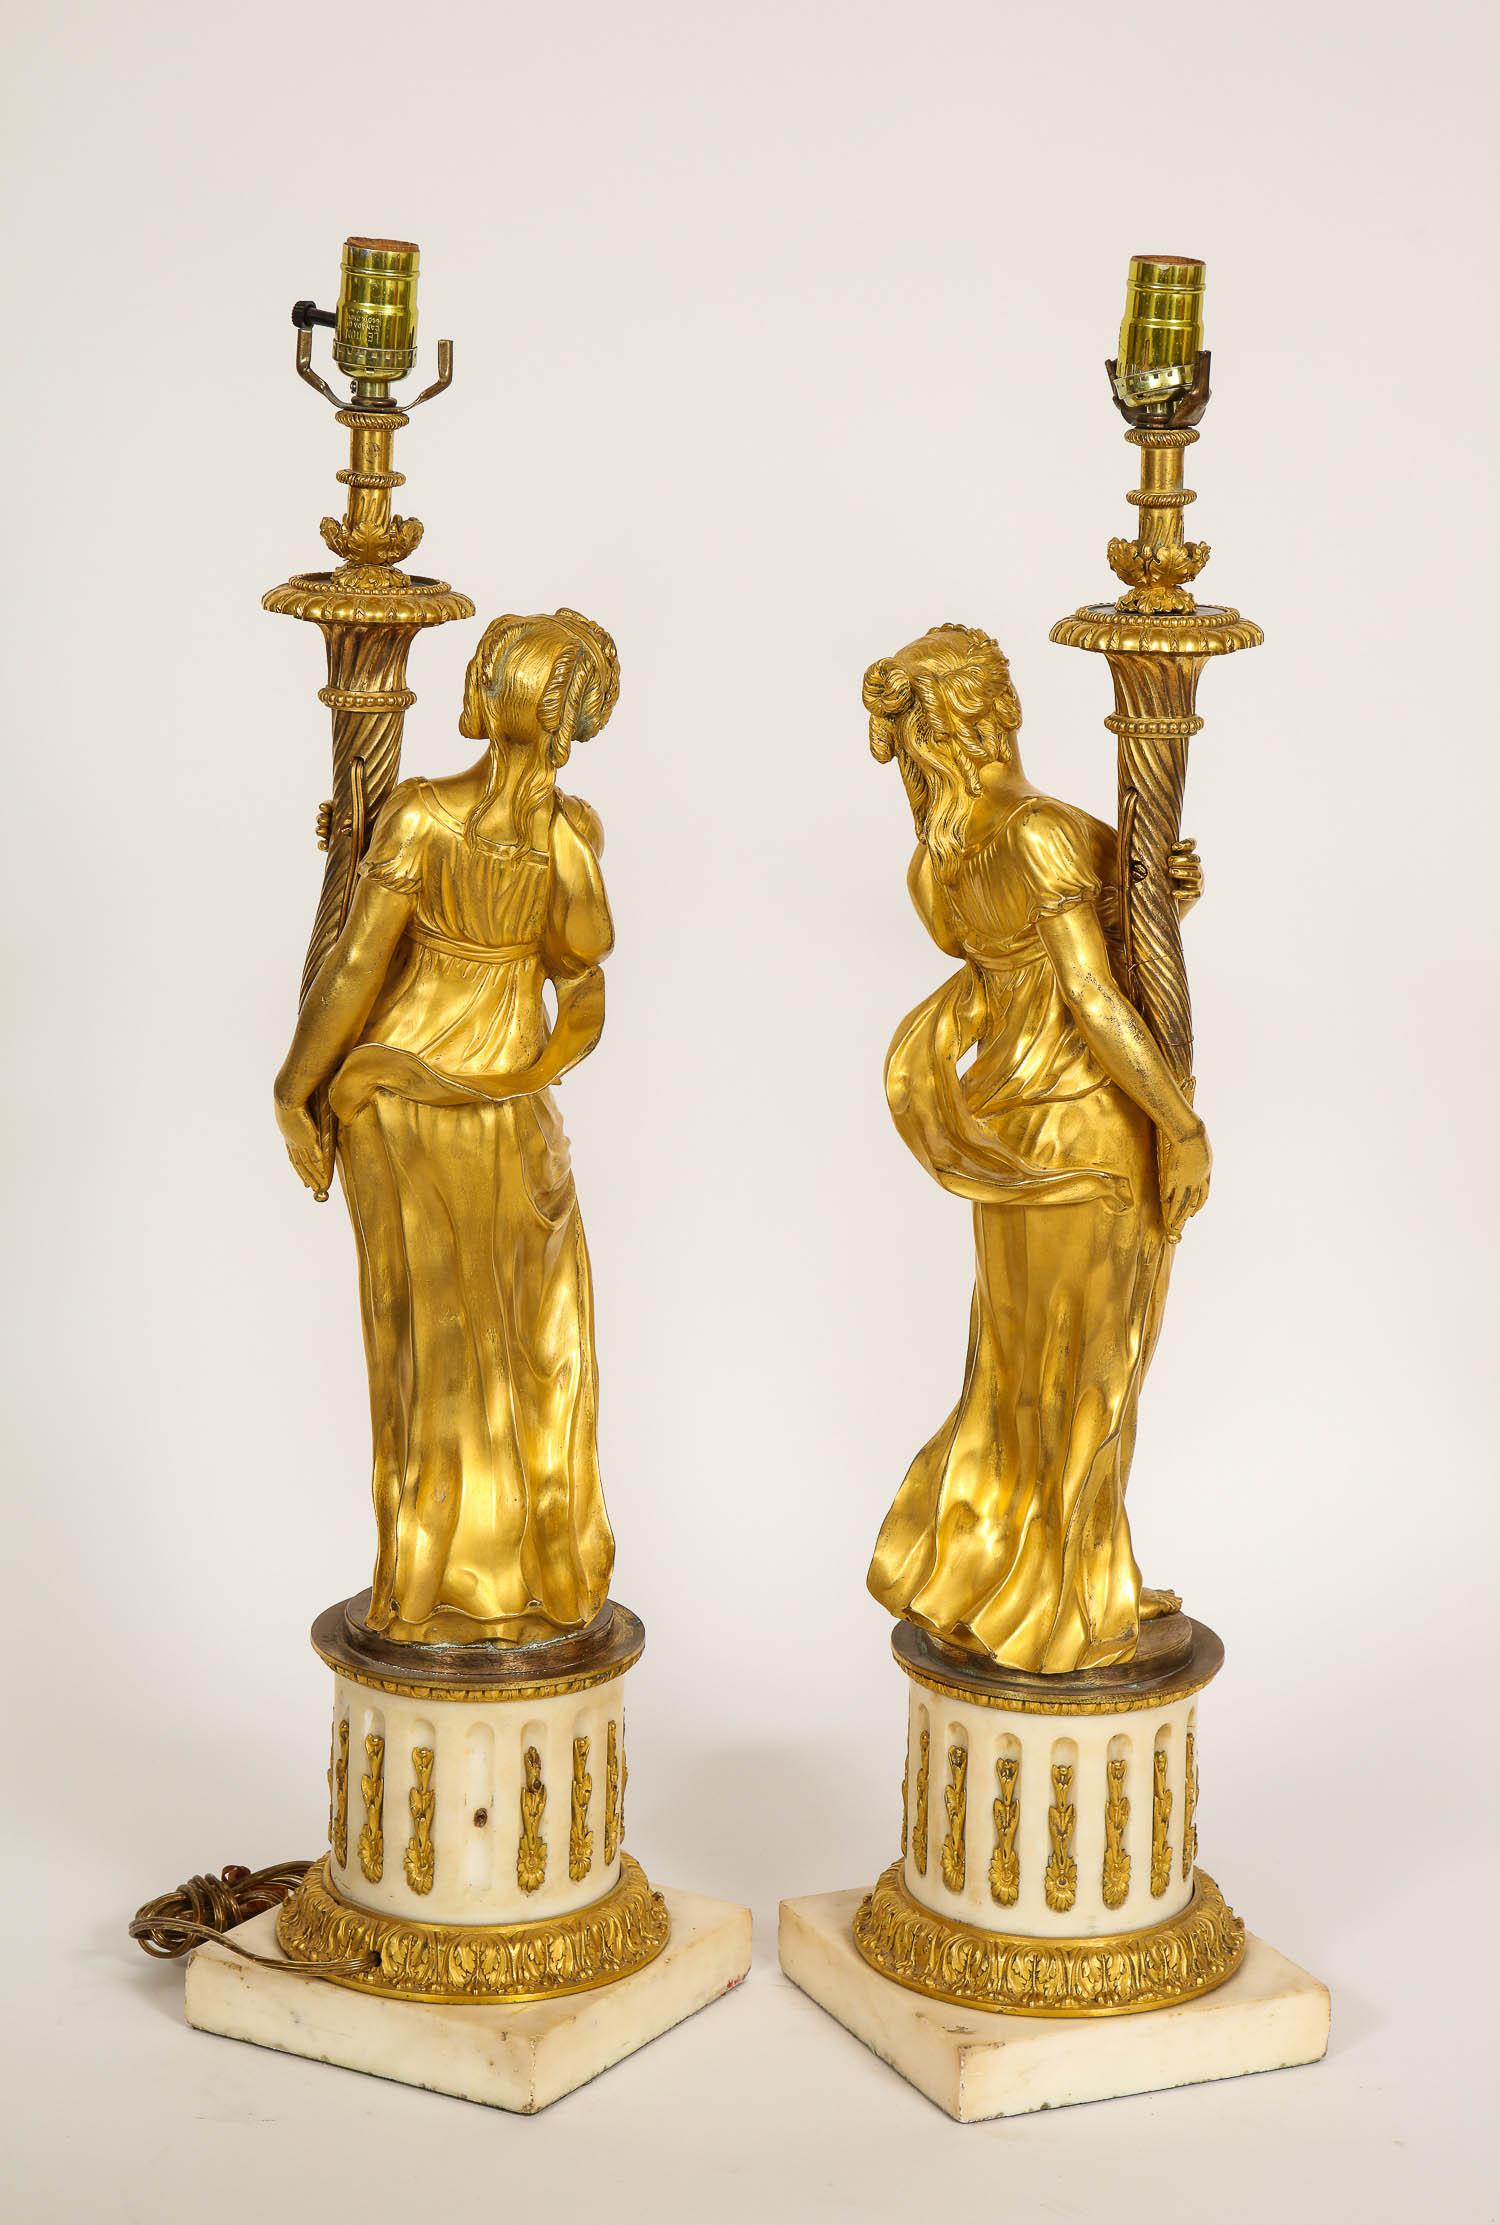 Pair of 18th Century Louis XVI Period Gilt-Bronze Figures of Maidens as Lamps For Sale 5